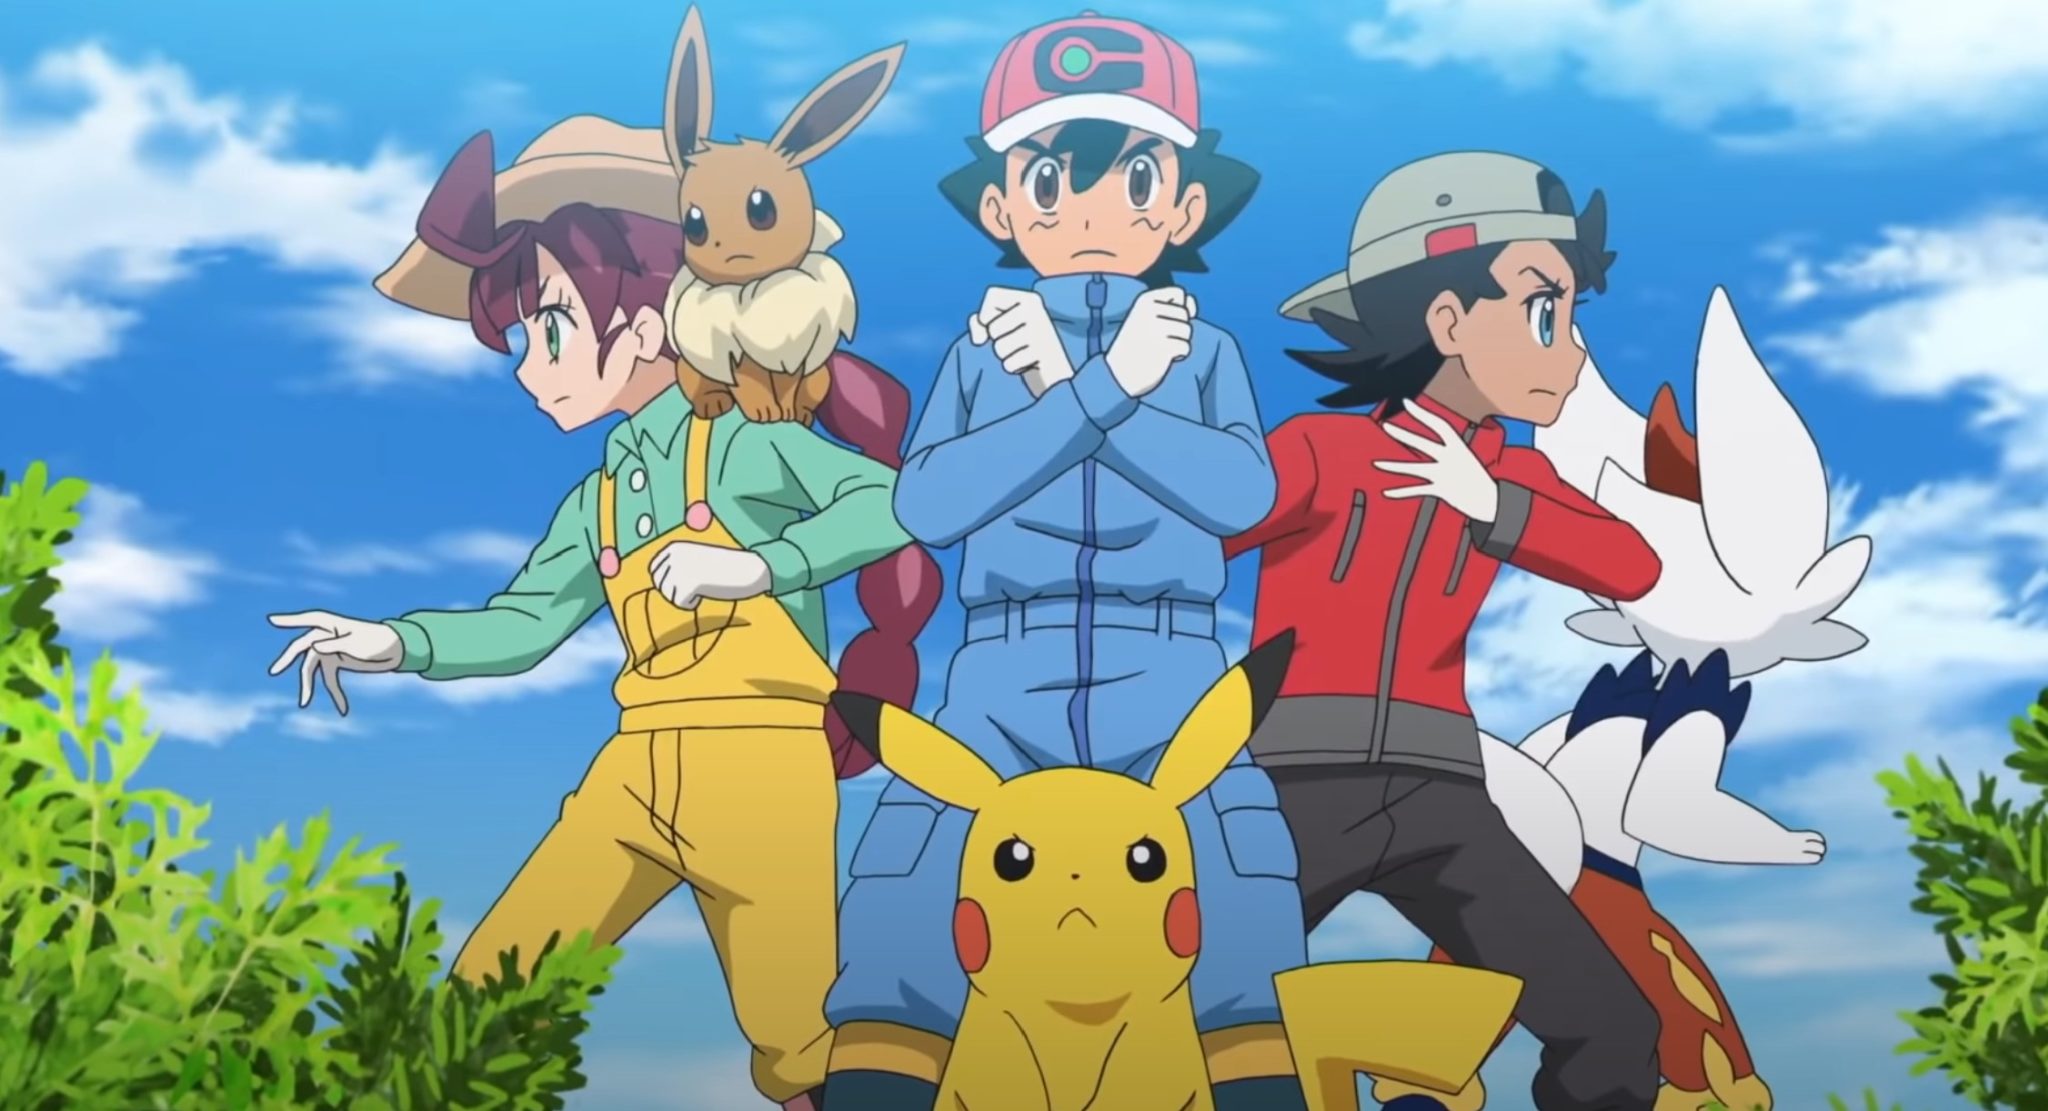 Netflix's "Pokémon Master Journeys The Series" Release Date and